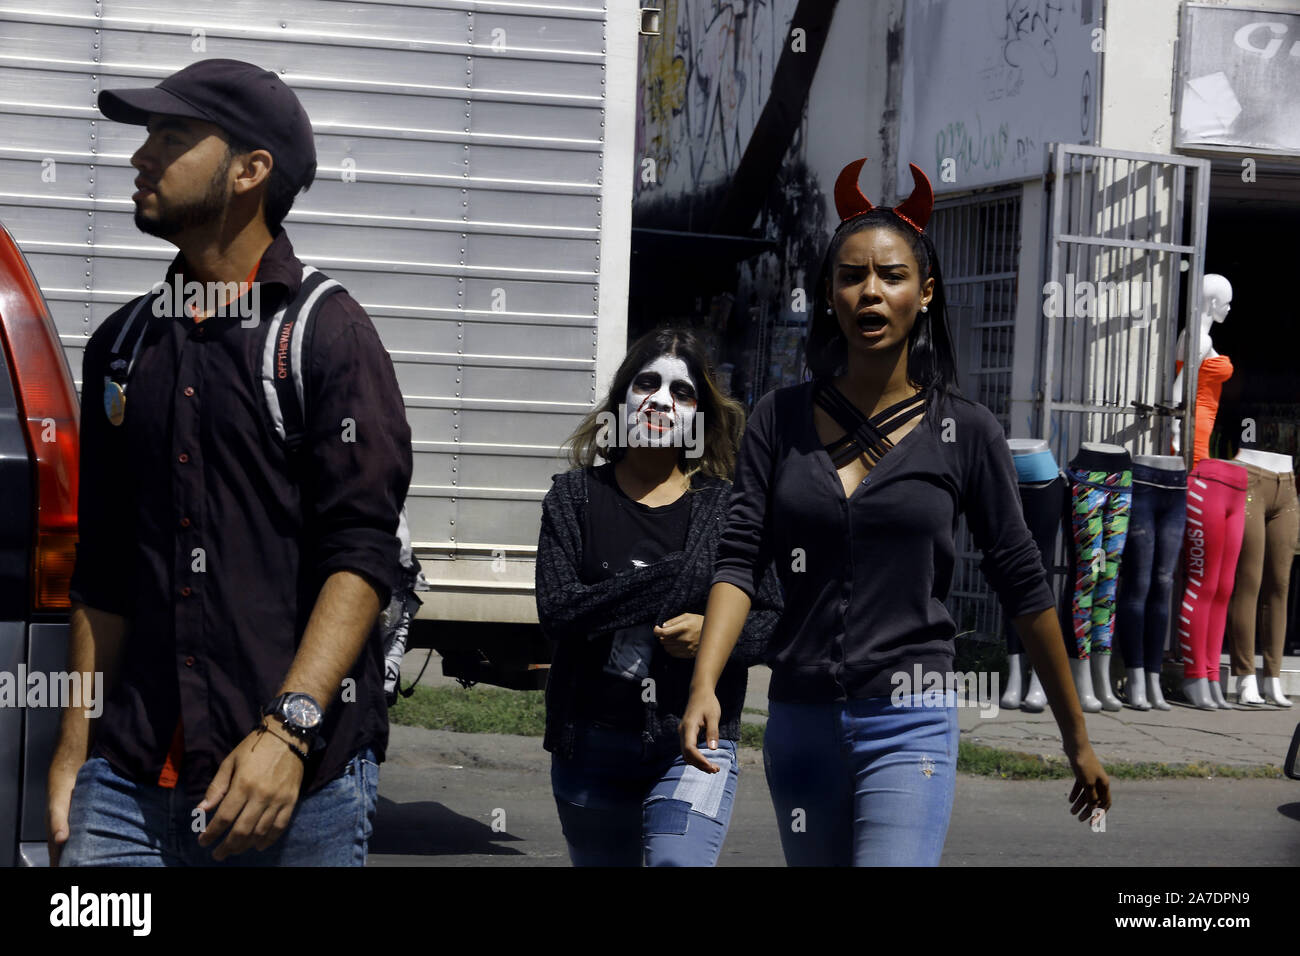 Guacara, Carabobo, Venezuela. 1st Nov, 2019. November 01, 2019. Two young people walk the streets in costumes alluding to the celebration of Halloween, what is unknown is that if they threatened to trick or give away sweets, in Goto: Juan Carlos Hernandez state. Photo: Juan Carlos Hern''ndez Credit: Juan Carlos Hernandez/ZUMA Wire/Alamy Live News Stock Photo